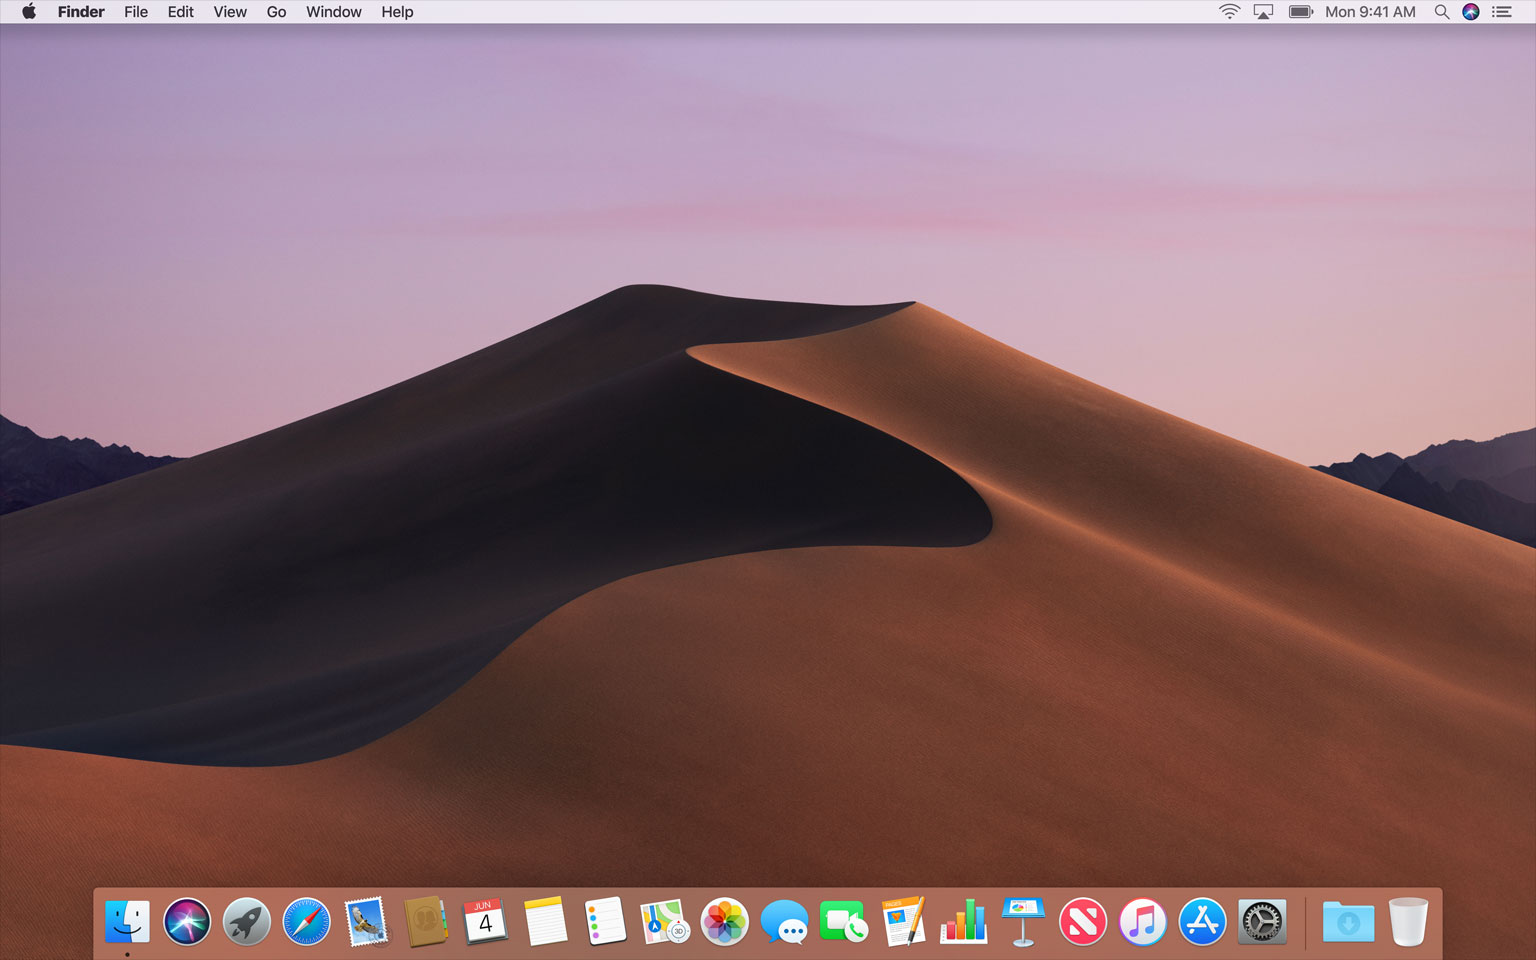 Mojave download the last version for mac